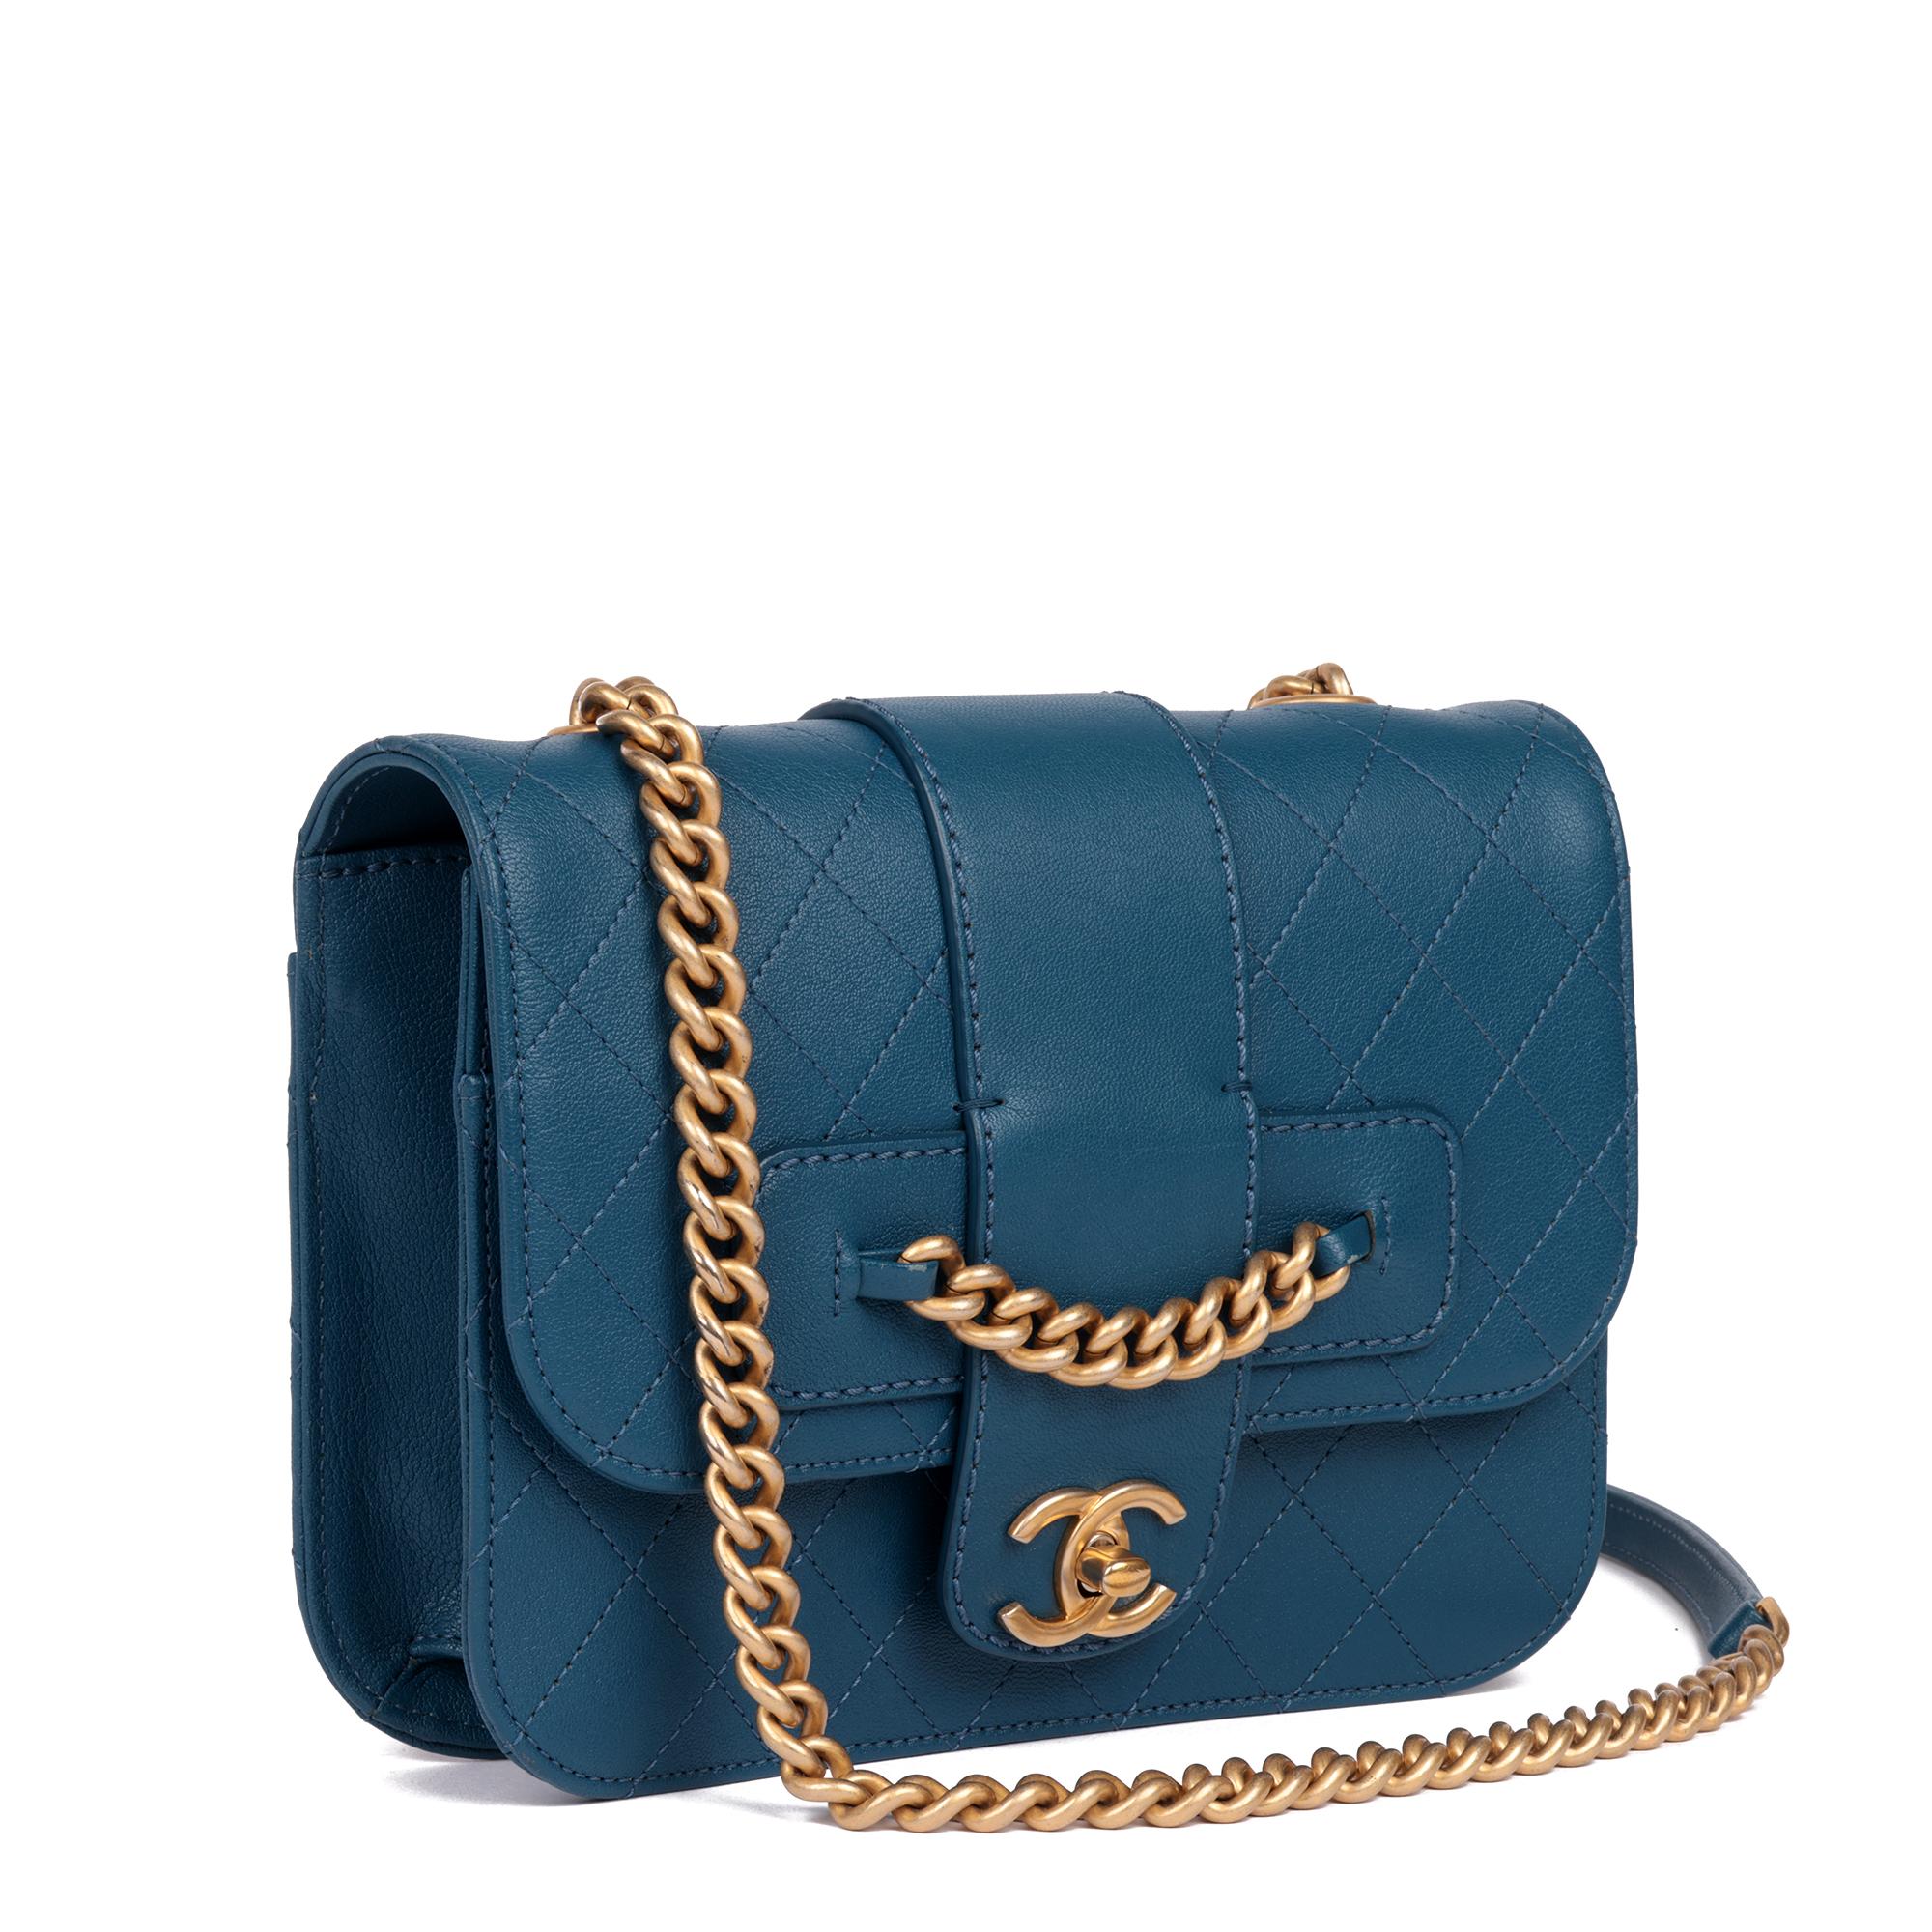 CHANEL
Blue Quilted Calfskin Leather Mini Chain Front Classic Single Flap Bag

Xupes Reference: HB5058
Serial Number: 24904931
Age (Circa): 2017
Accompanied By: Chanel Dust Bag, Authenticity Card
Authenticity Details: Authenticity Card, Serial